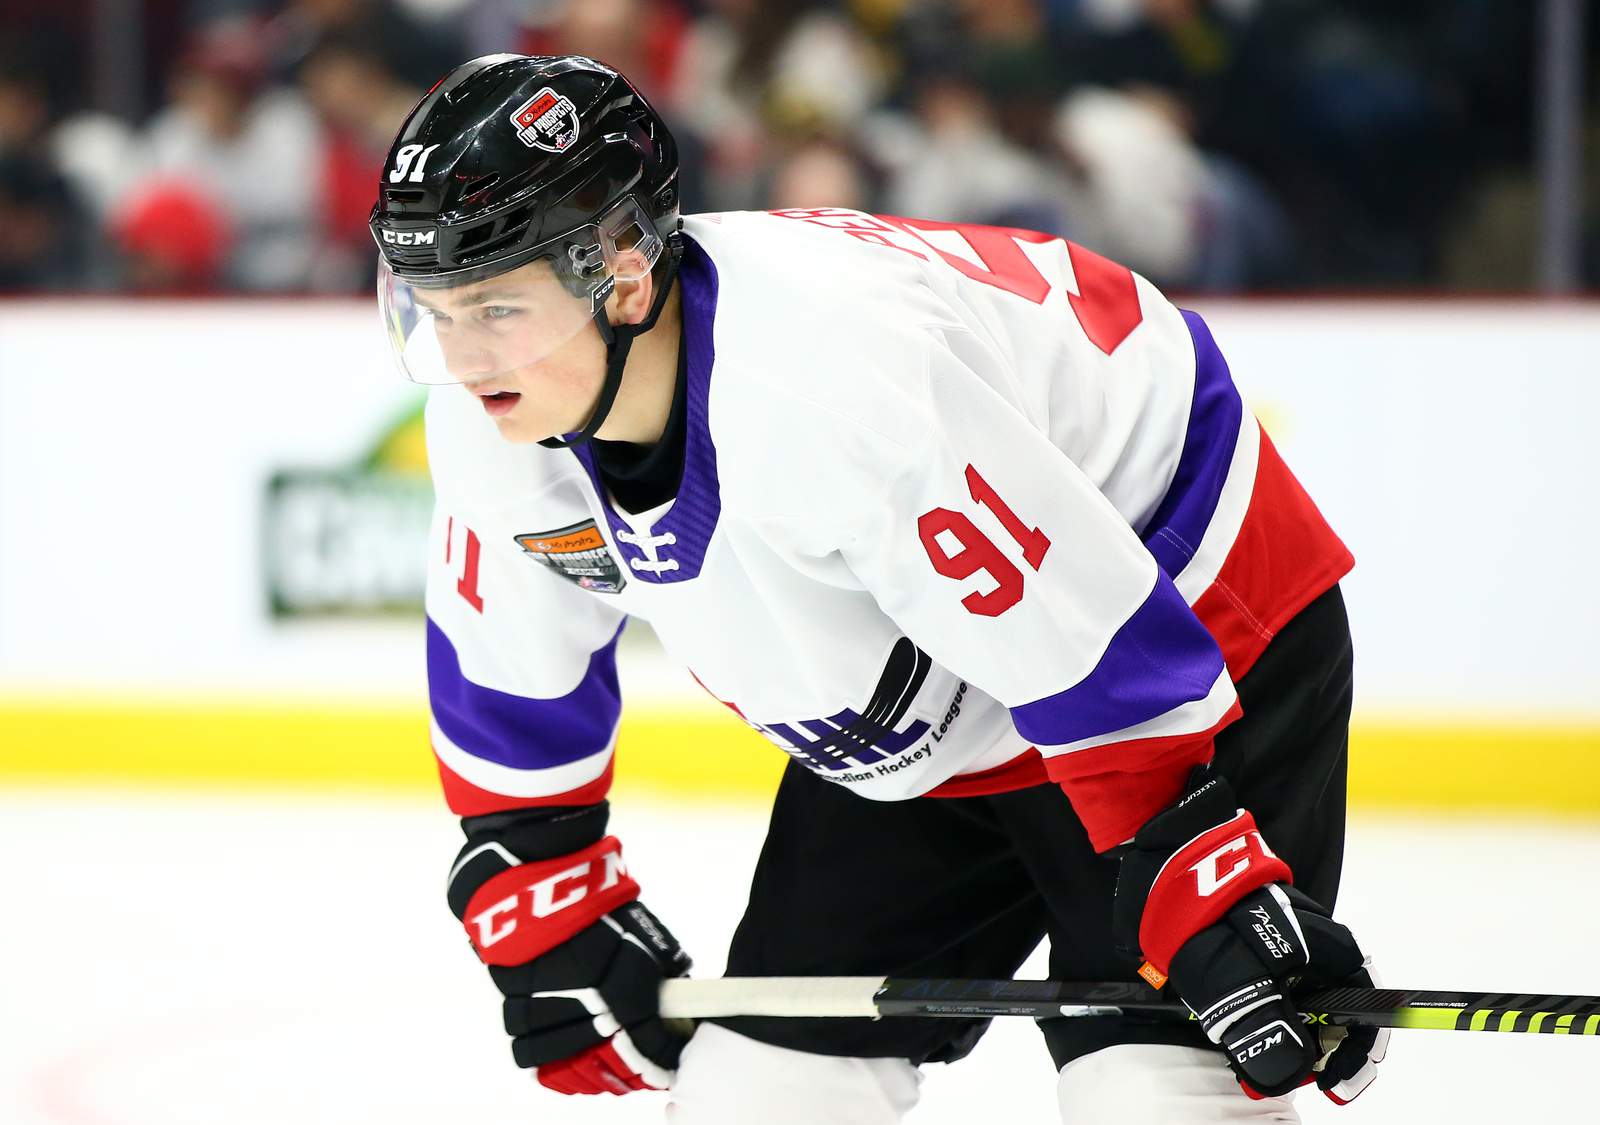 2020 NHL draft this week: Red Wings have 4th overall pick